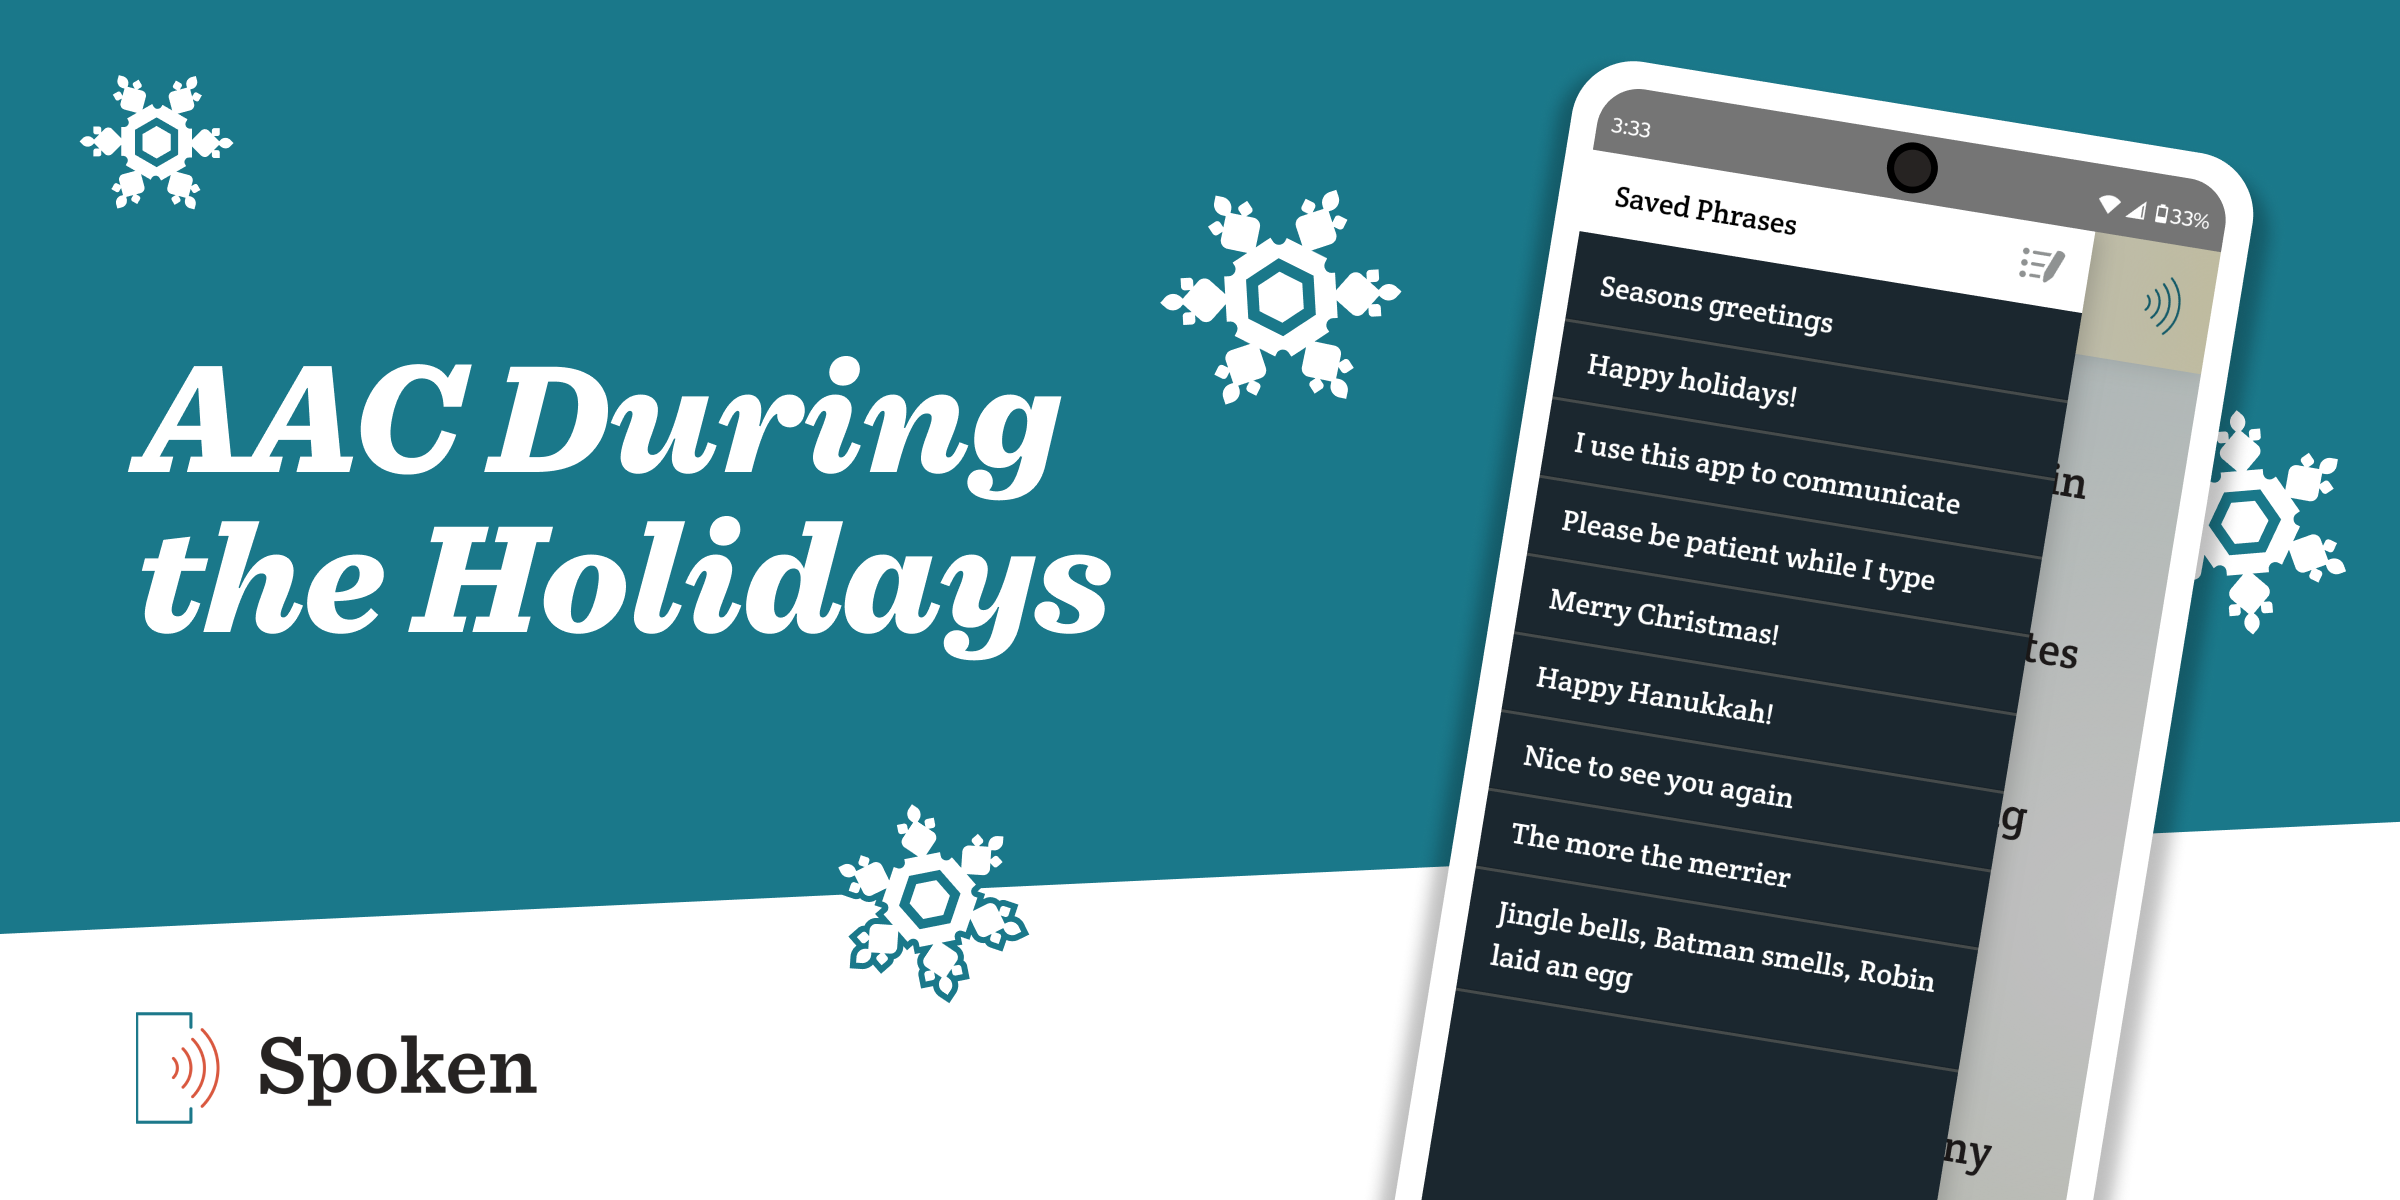 A picture of the Spoken app with various saved phrases relating to the holidays